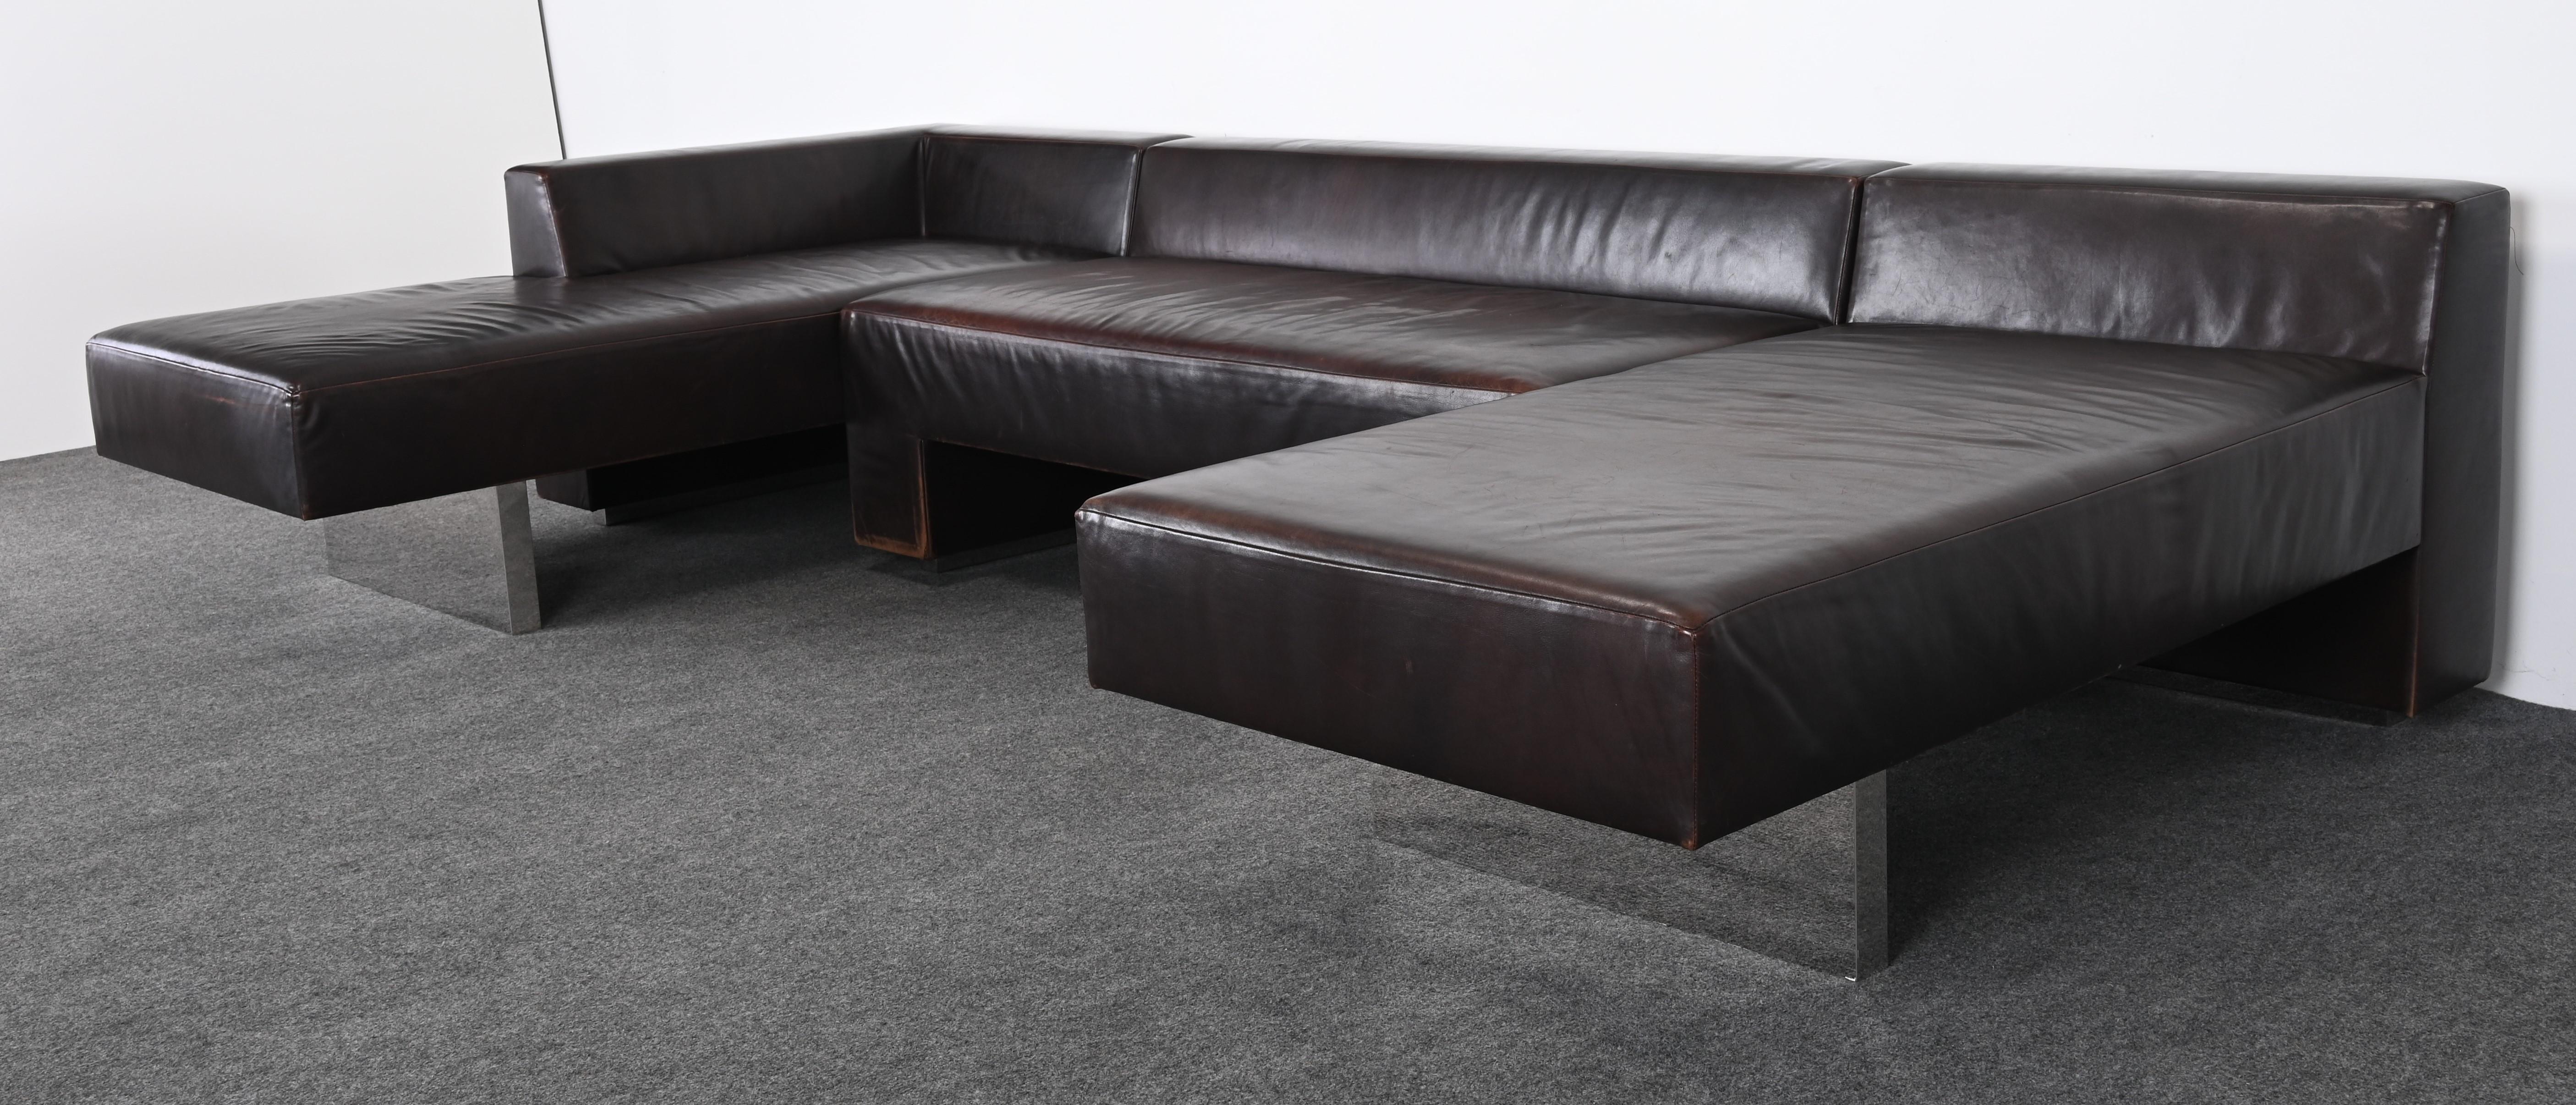 American Sectional Sofa and Leather and Steel Bench by Vladimir Kagan for Gucci, 1990s